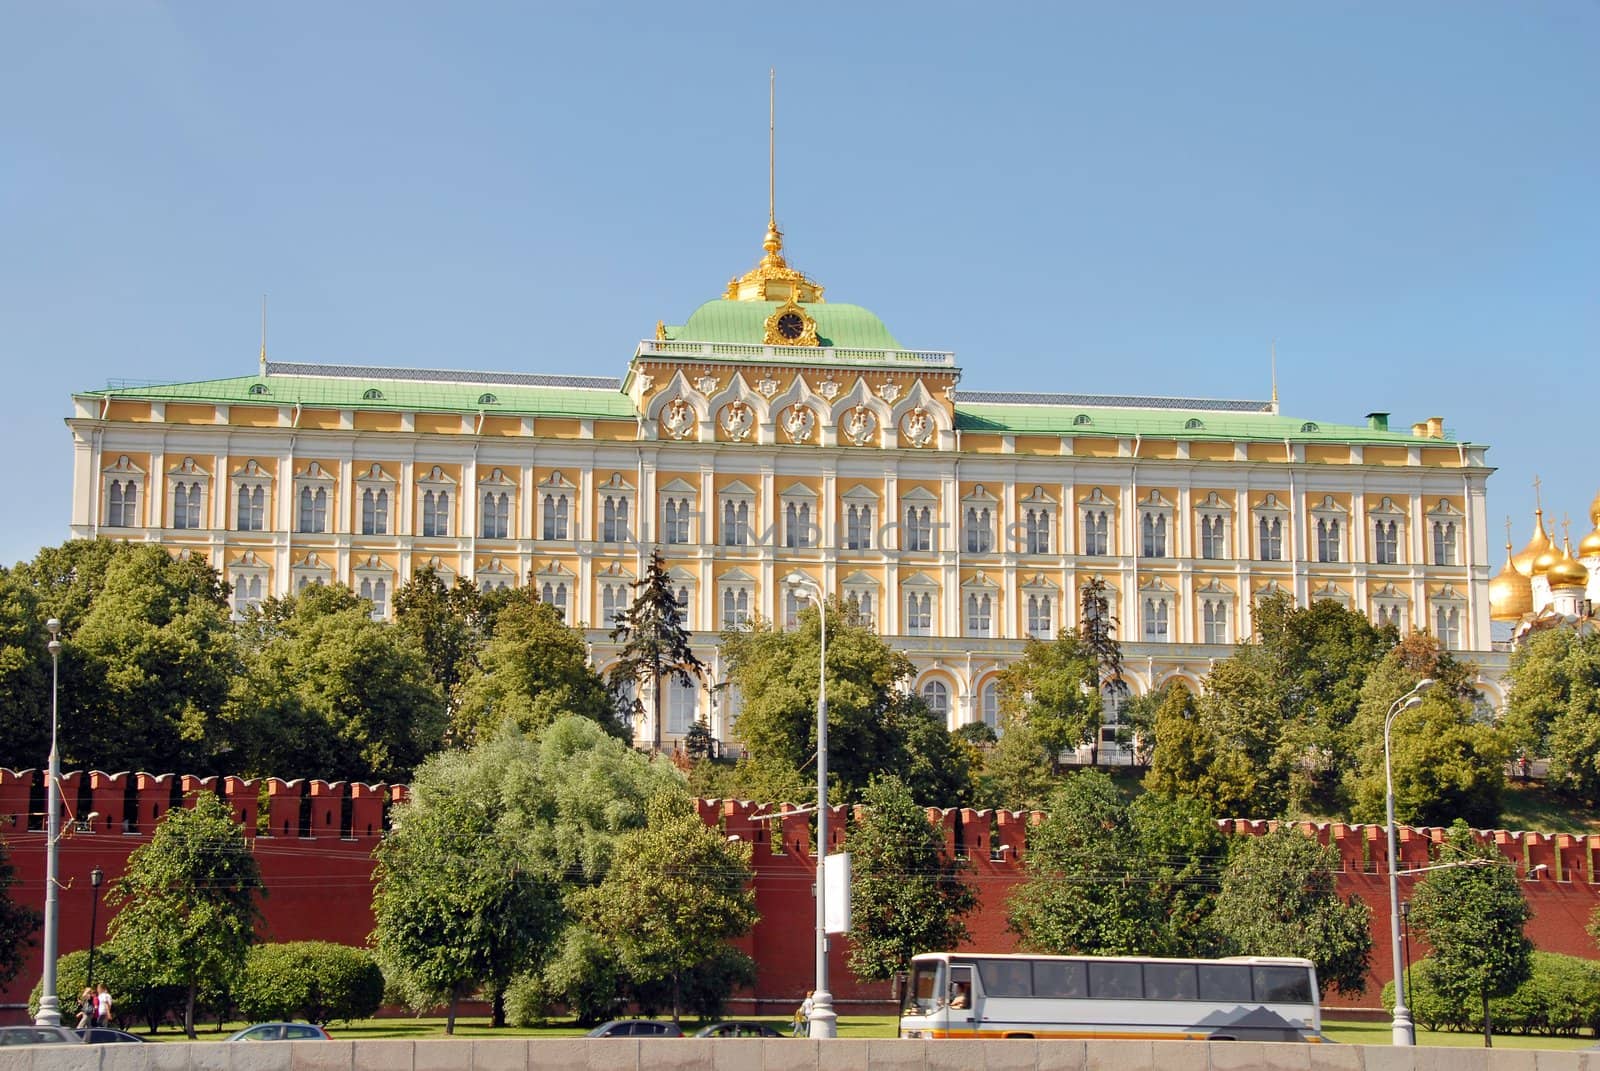 building of the great Kremlin palace in Moscow